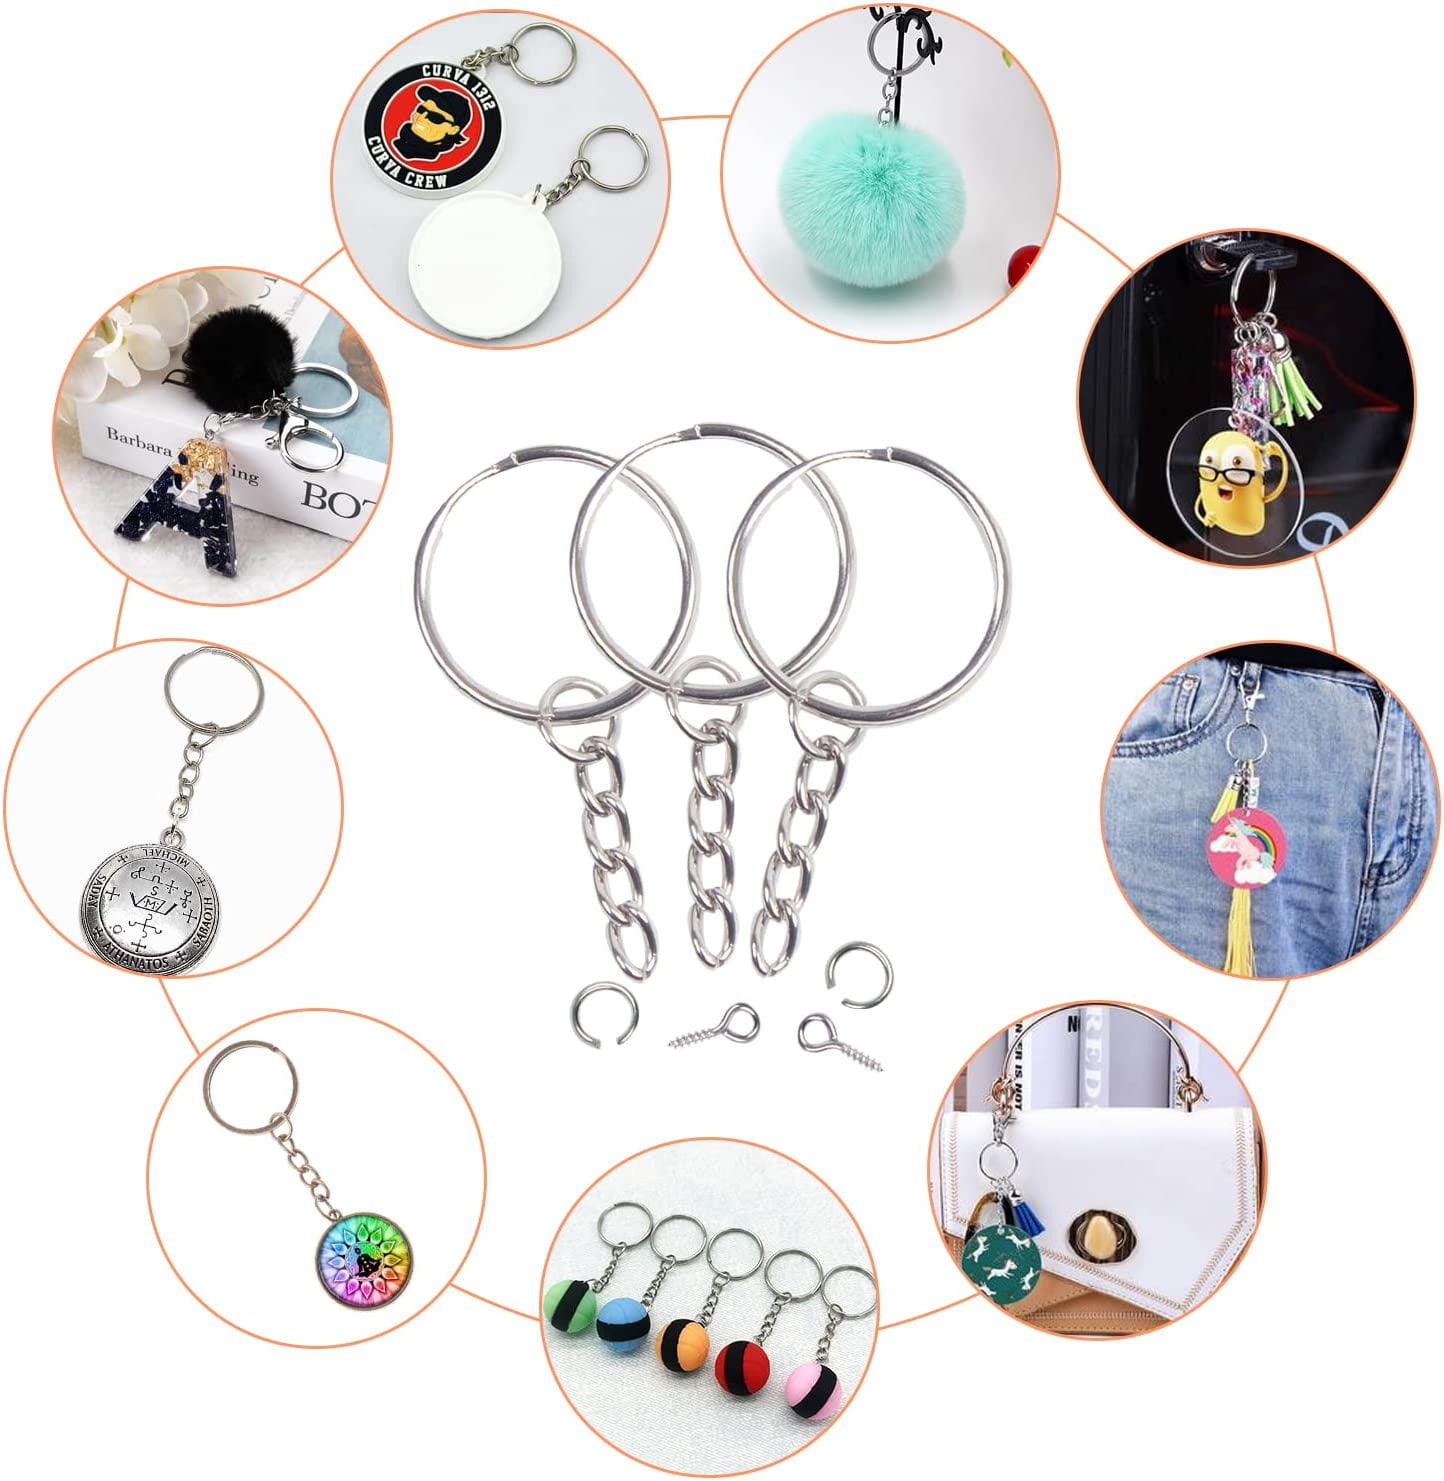 Split Key Rings Bulk Set With Chain And 25mm Open Screw Eye Pins Ideal For  DIY Crafts, Charm Jewelry Making From Yangchenwang, $10.09